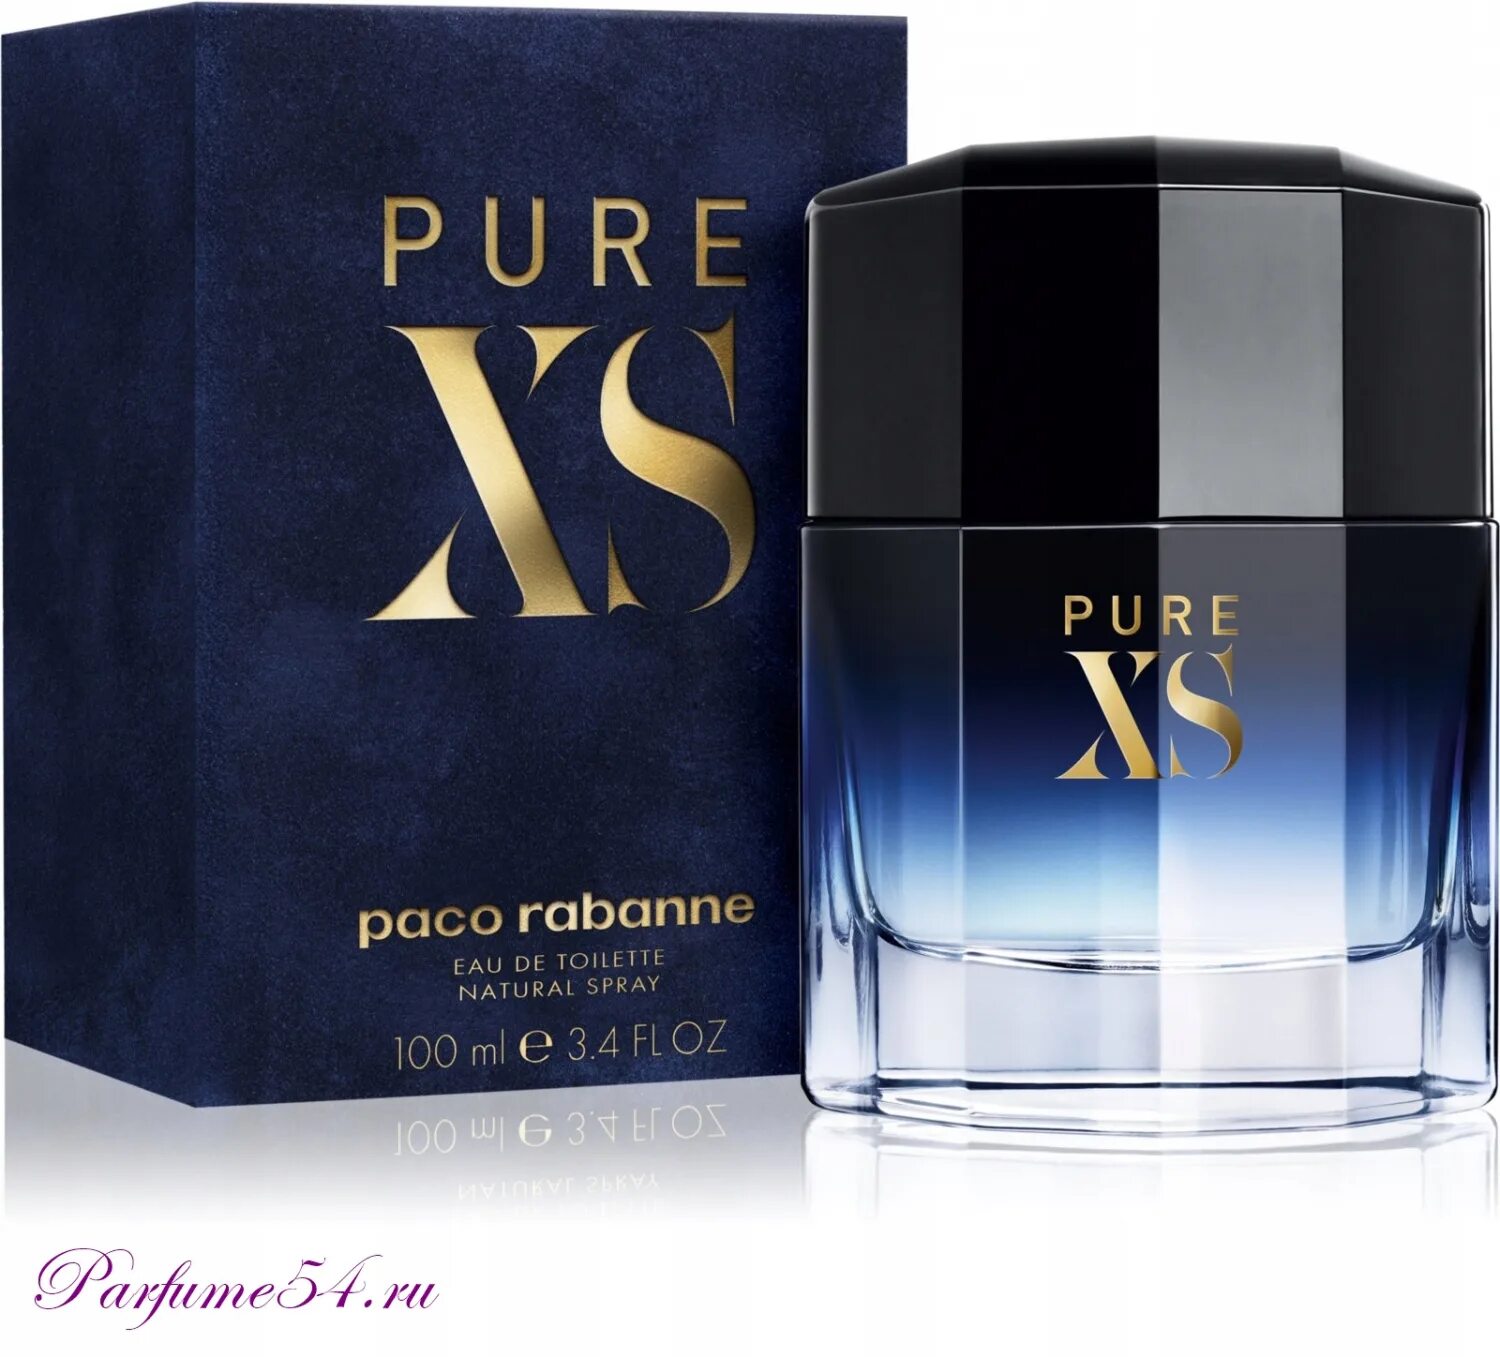 Paco Rabanne Pure XS. Paco Rabanne Pure XS Toilette for men. Paco Rabanne XS туалетная вода 100 мл. Paco Rabanne Pure excess.